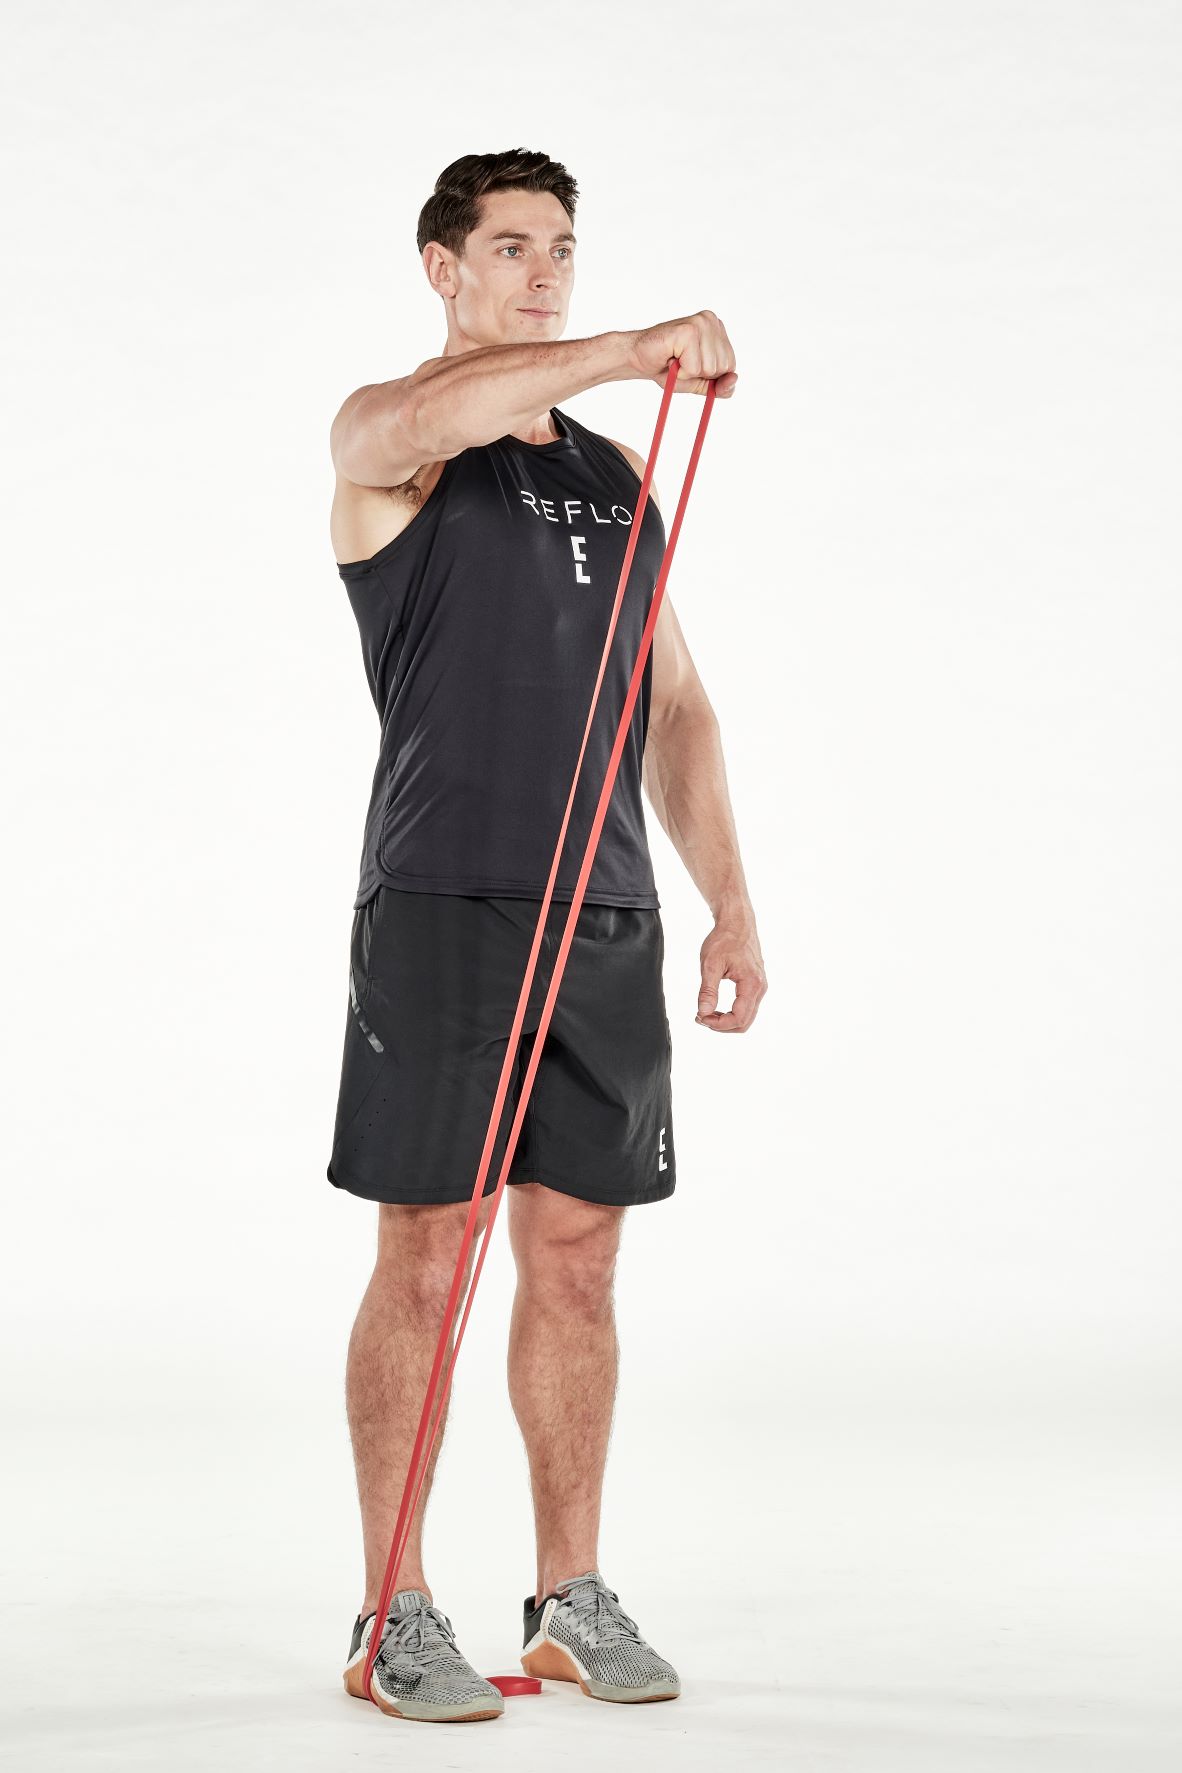 man demonstrating step two of resistance band front raise; standing up straight, he is holding a band that is wrapped under one foot in one hand; keeping the arm straight, he lifts and extends his arm up until it is level with his shoulder; he wears a black fitness vest, black shorts and trainers